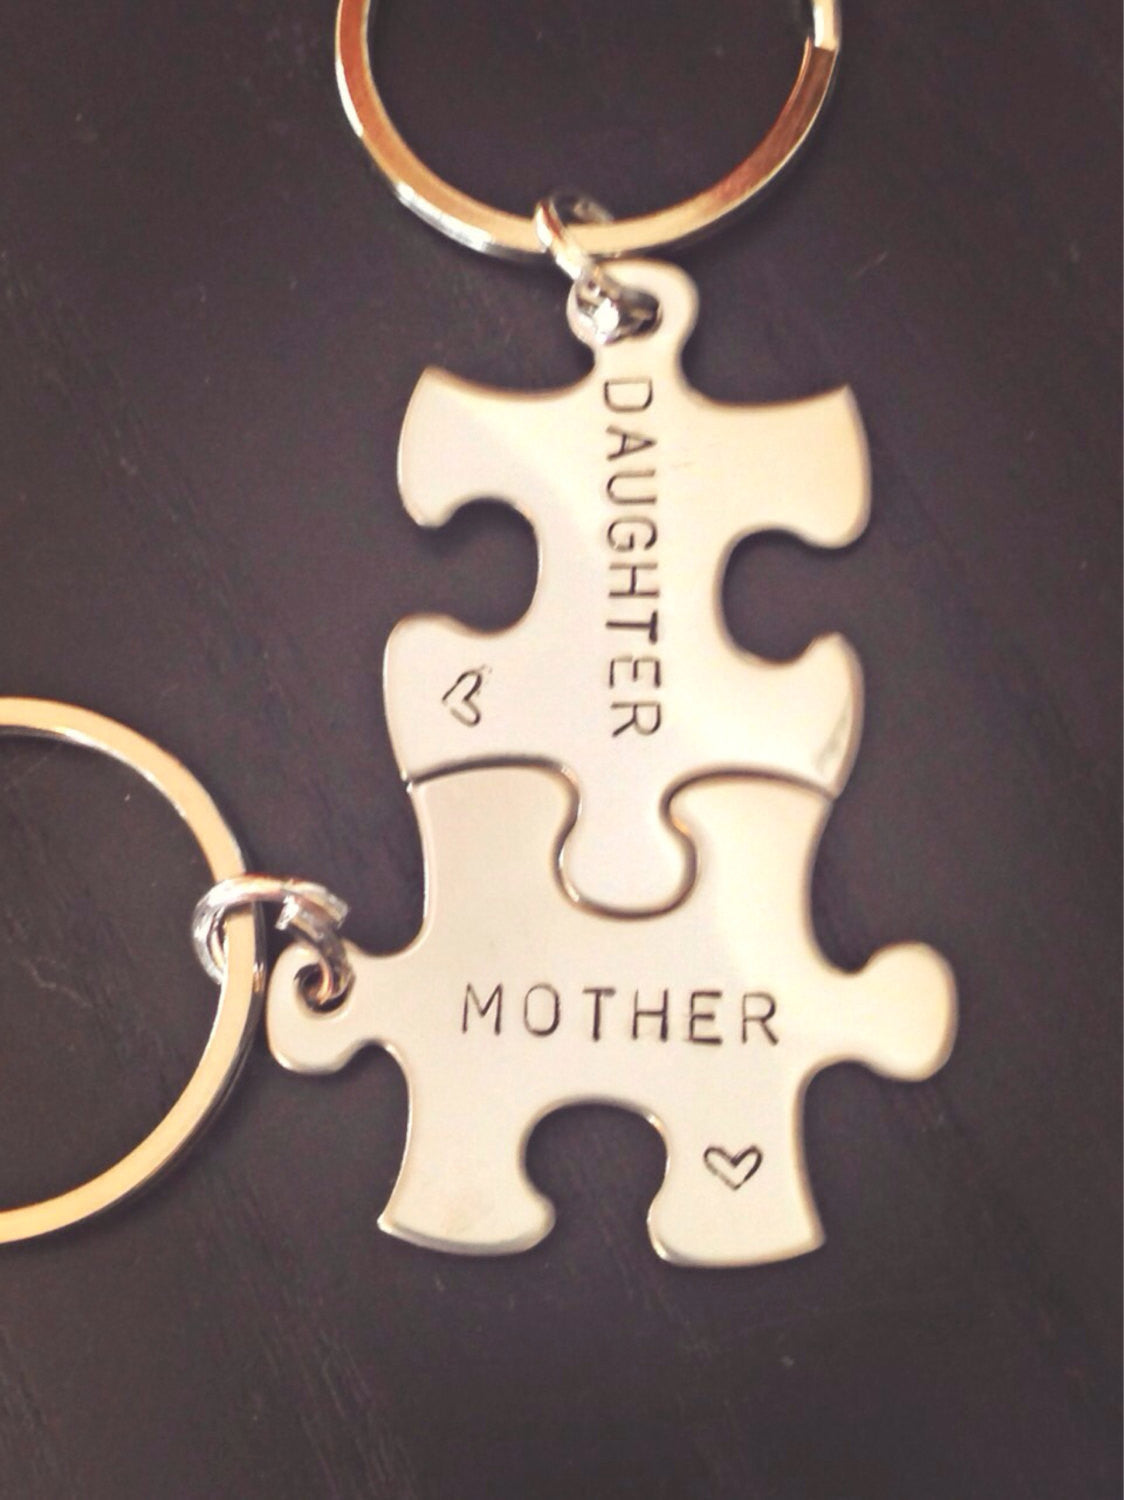 Personalized Puzzle Keychain, Mother Daughter Keychain, Mother Daughter Gifts, Mothers Day, natashaaloha - Natashaaloha, jewelry, bracelets, necklace, keychains, fishing lures, gifts for men, charms, personalized, 